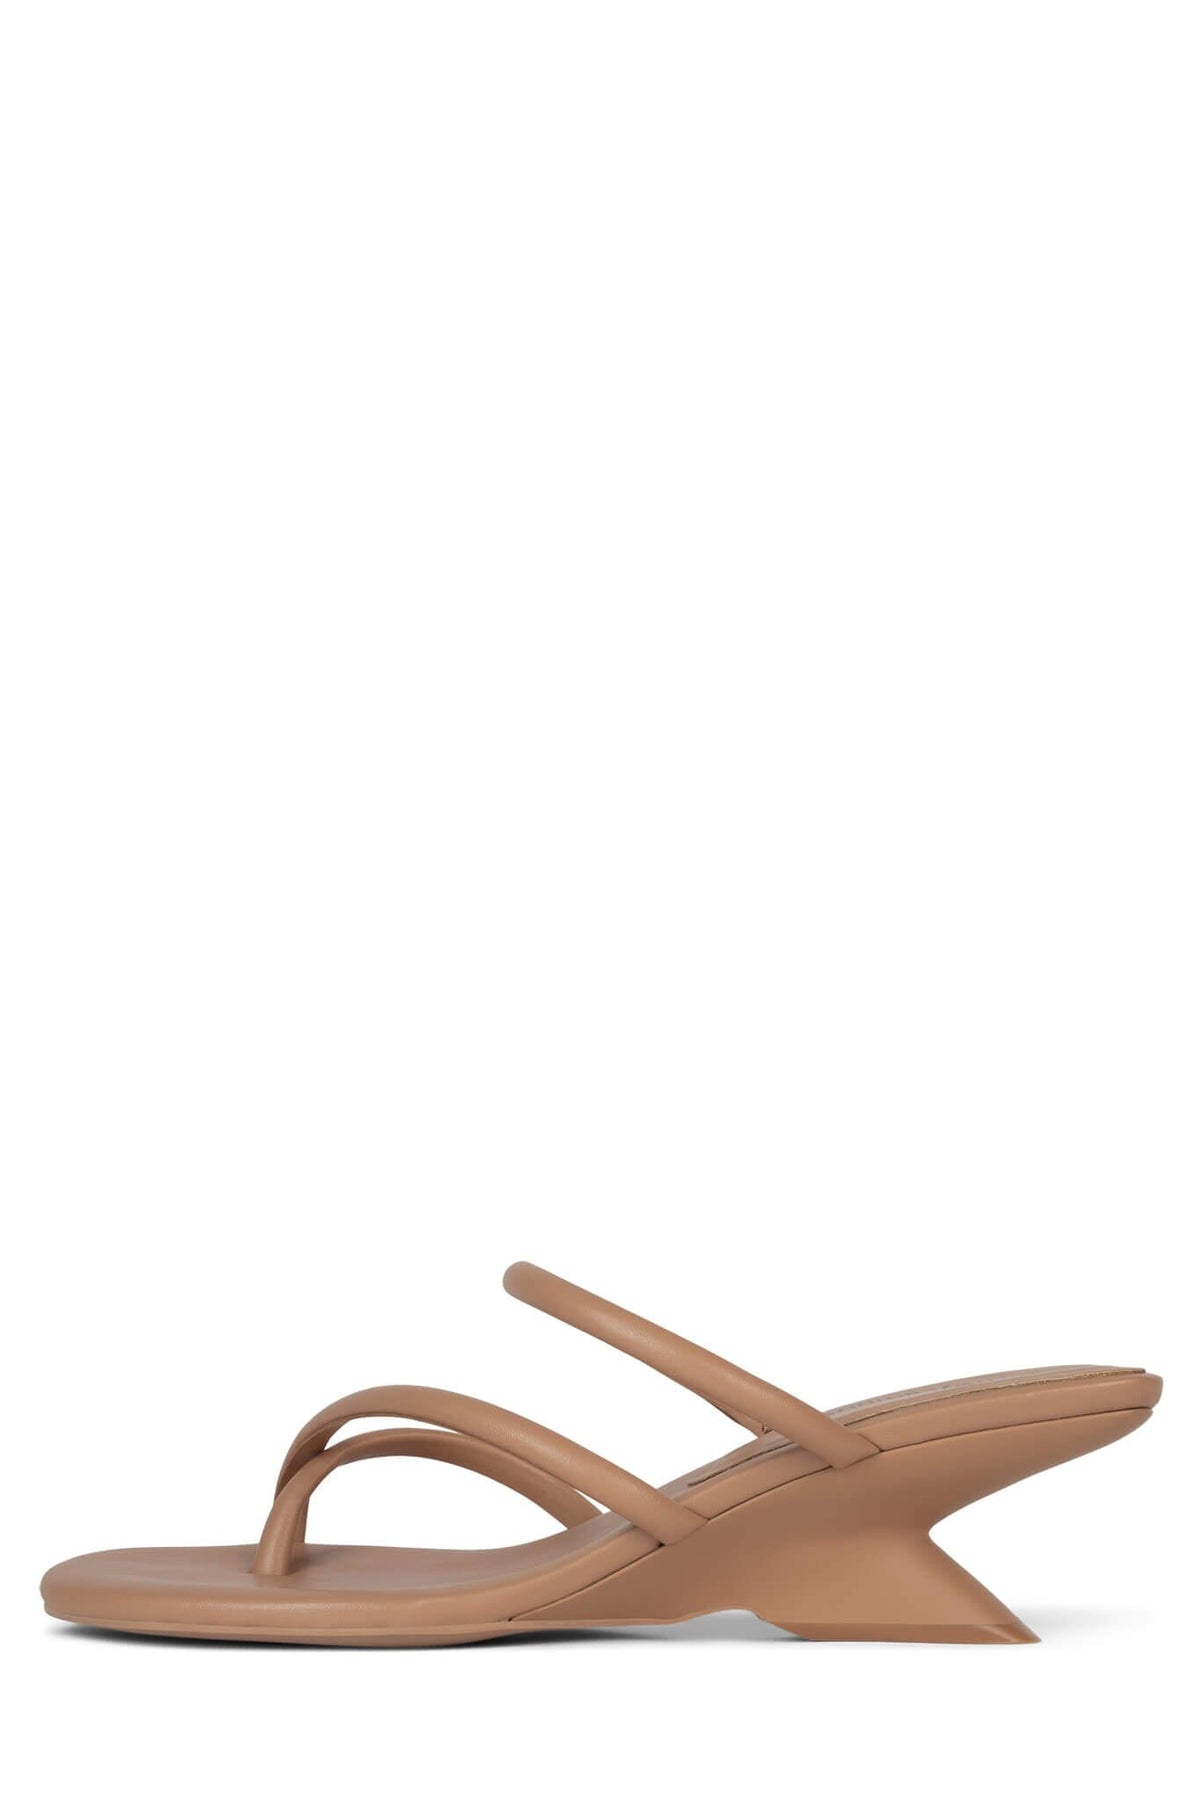 LELIA Jeffrey Campbell Strappy Sandals Natural